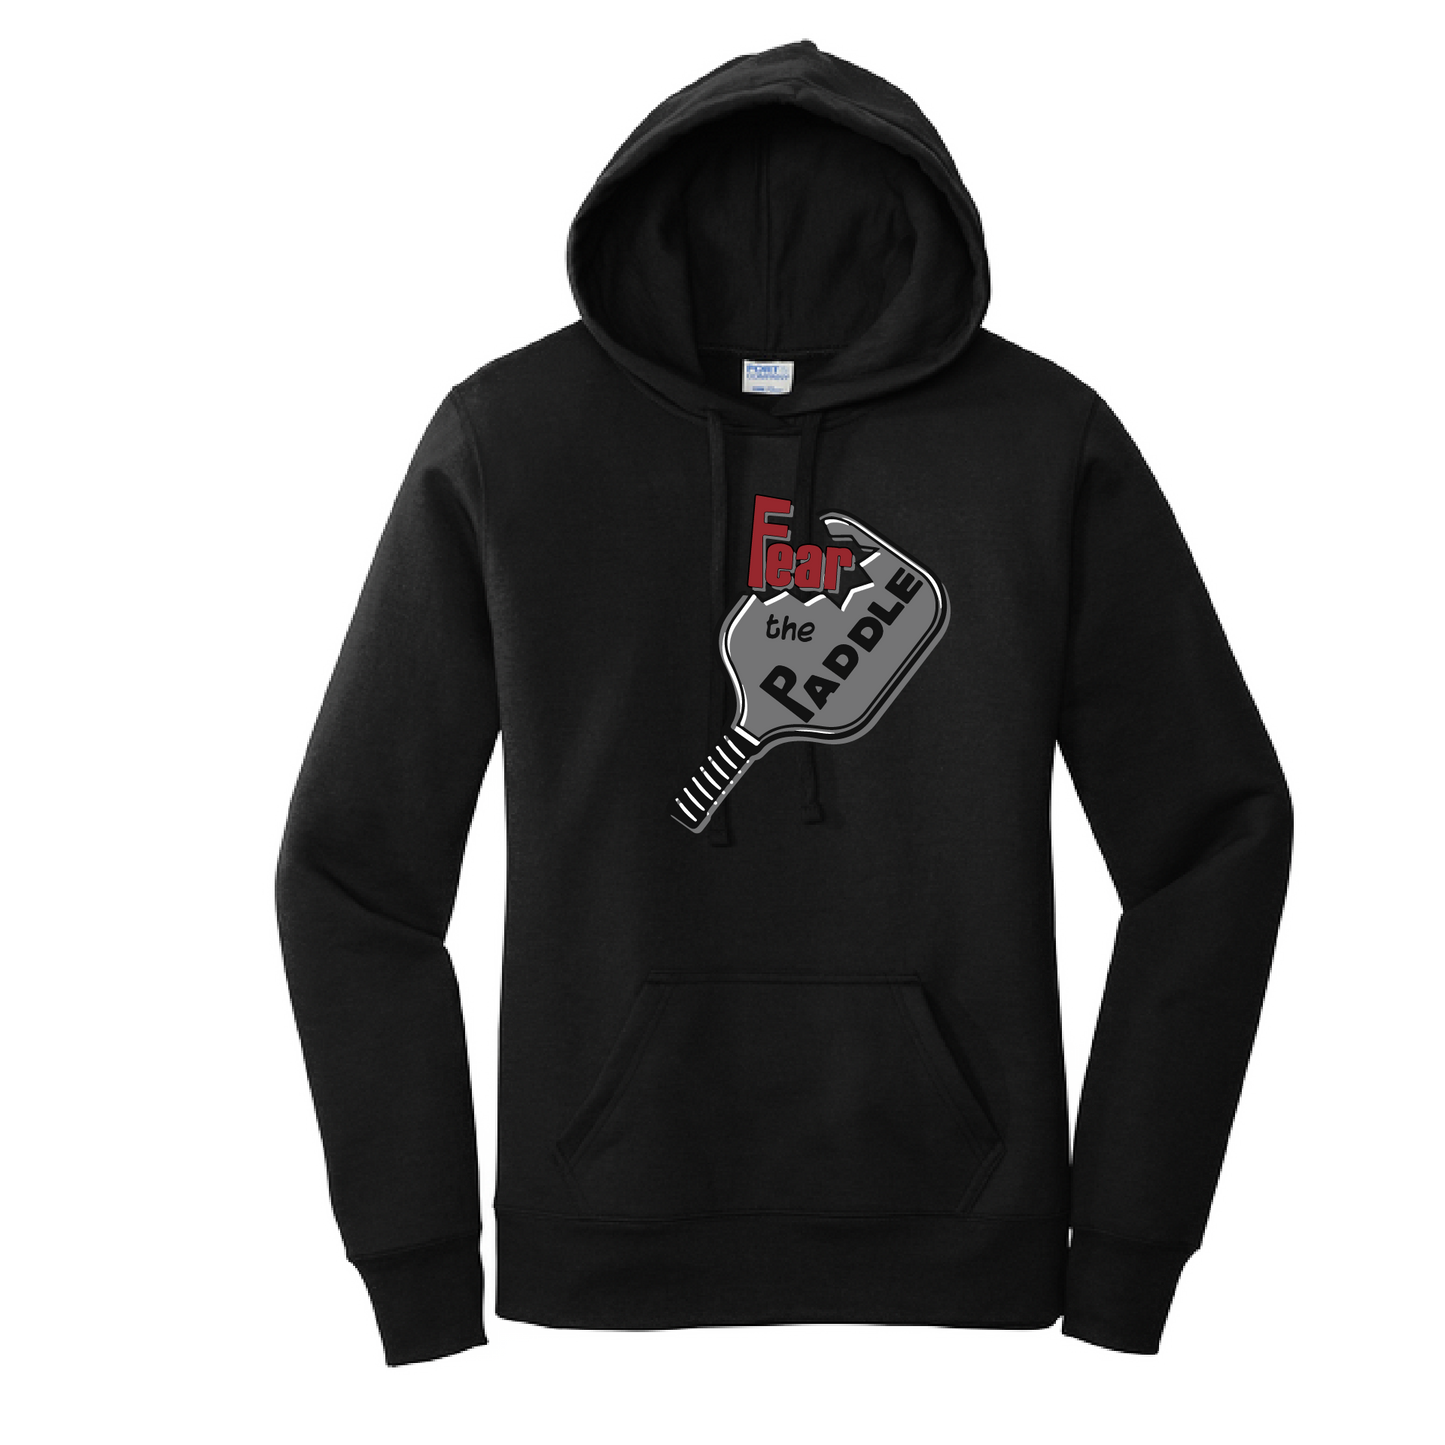 Pickleball Design: Fear the Paddle  Women's Hooded pullover Sweatshirt  Turn up the volume in this Women's Sweatshirts with its perfect mix of softness and attitude. Ultra soft lined inside with a lined hood also. This is fitted nicely for a women's figure. Front pouch pocket.